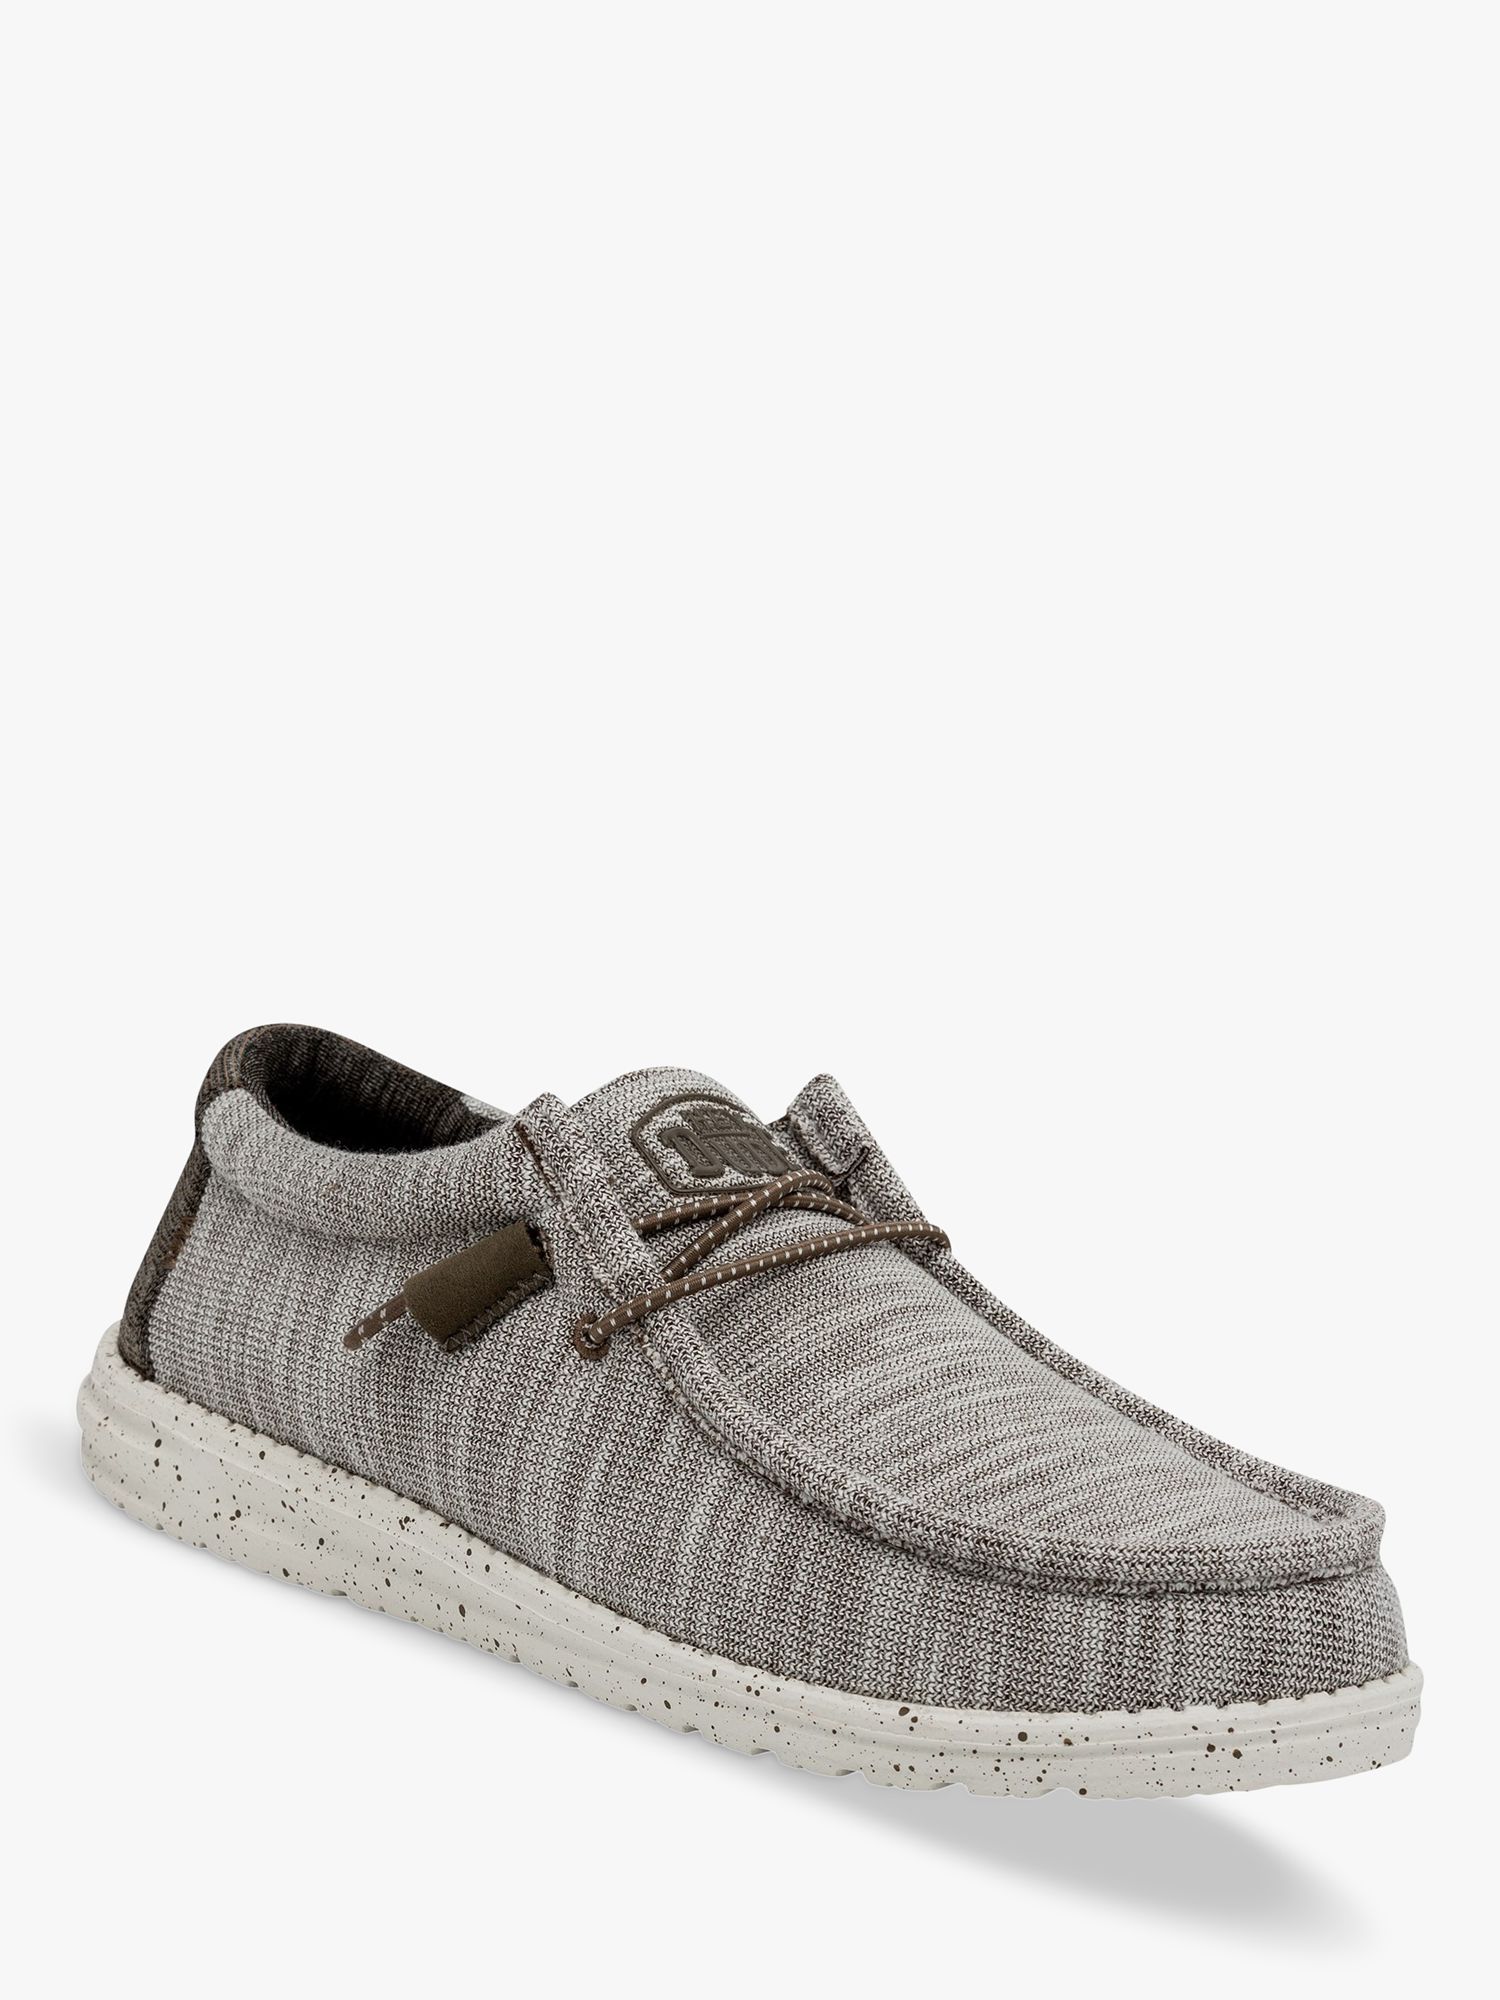 Hey Dude Wally Stretch Mix Moccasins, Grey at John Lewis & Partners